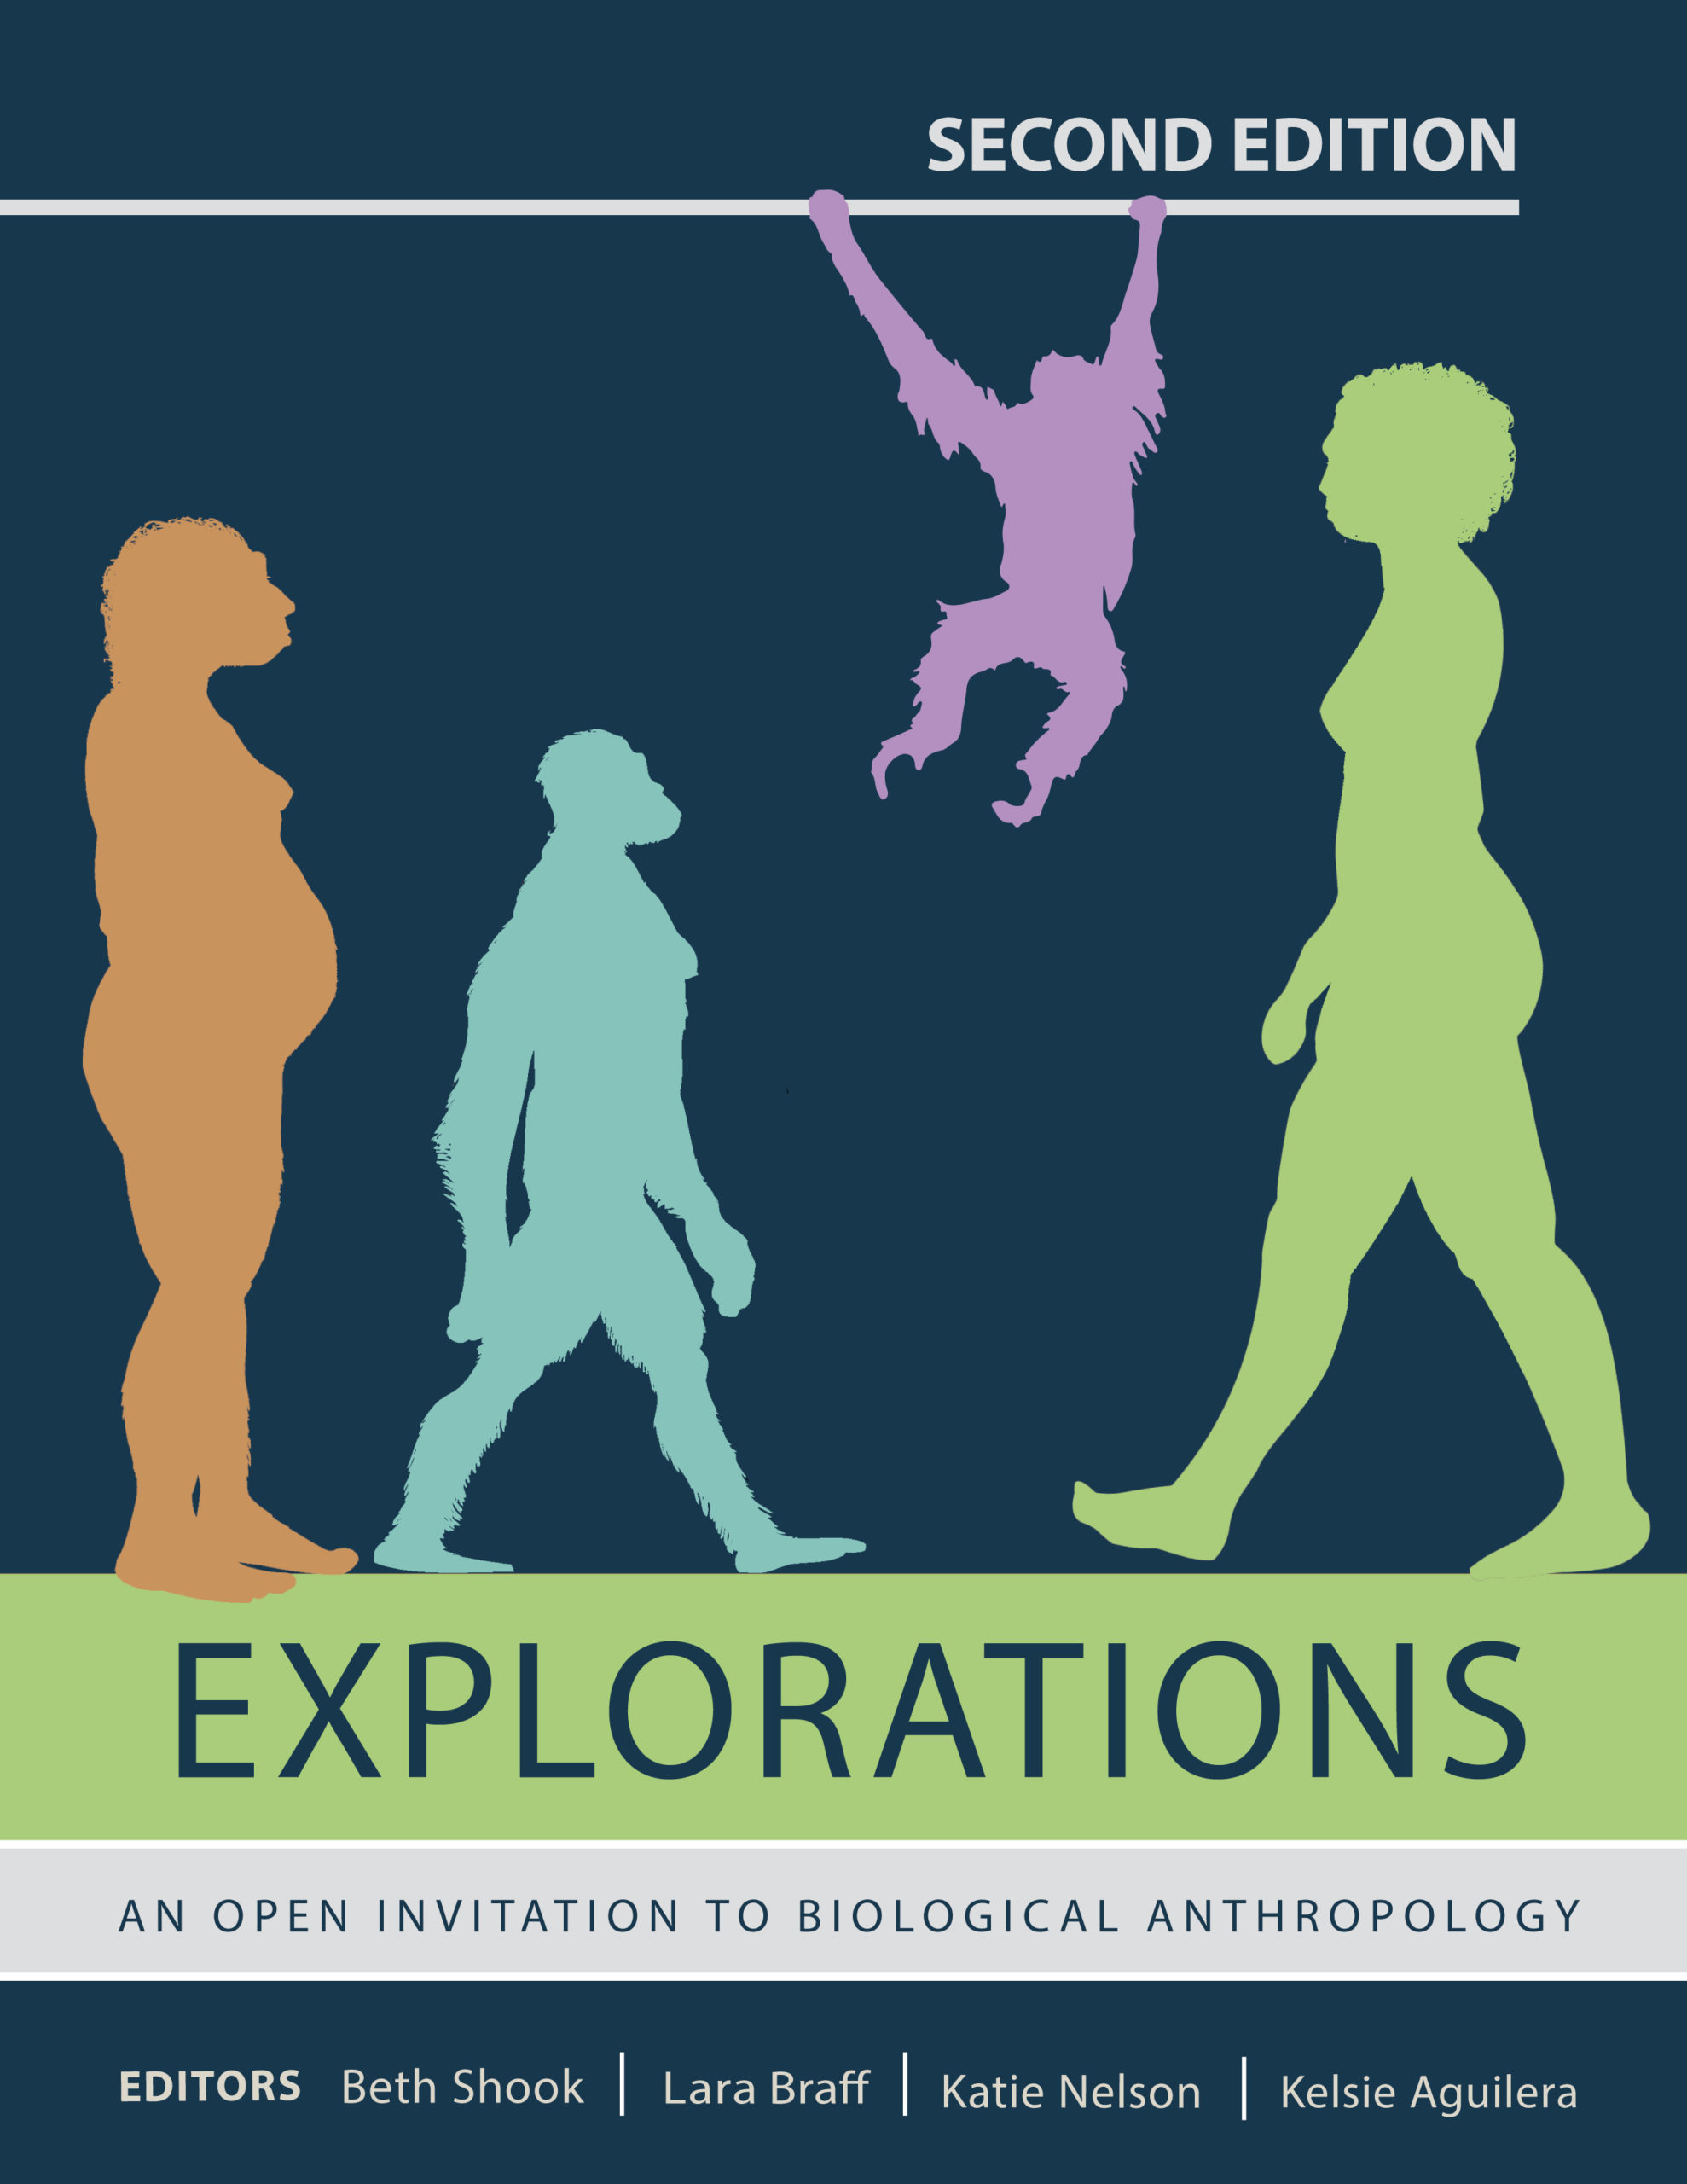 Book cover with human, primate and hominin silhouettes